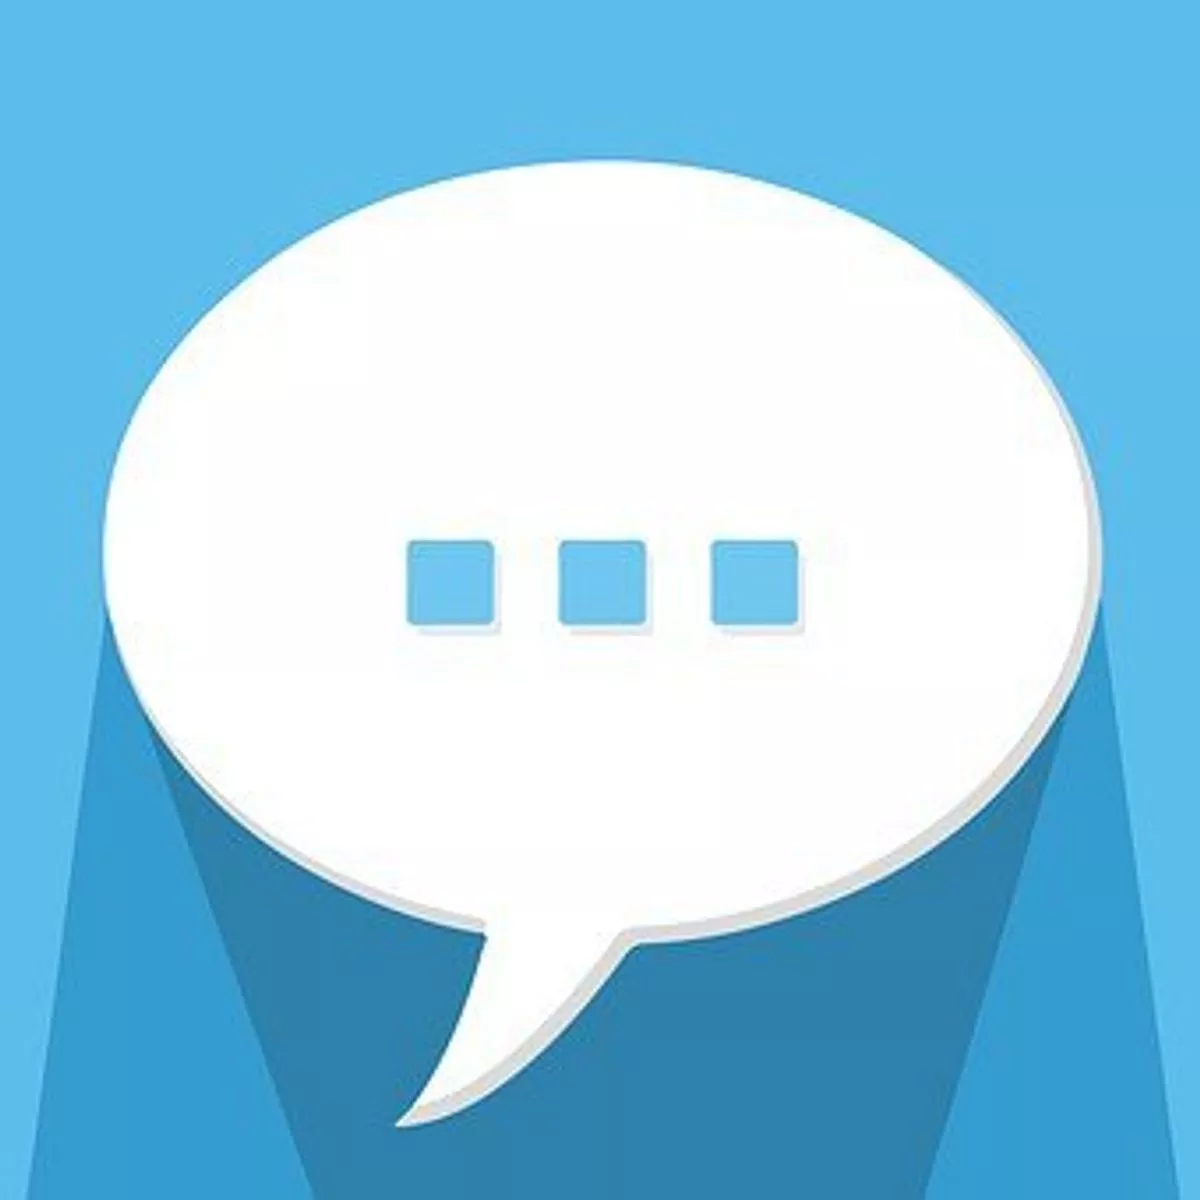 Mobile Bigo – The best potency of Live Chat